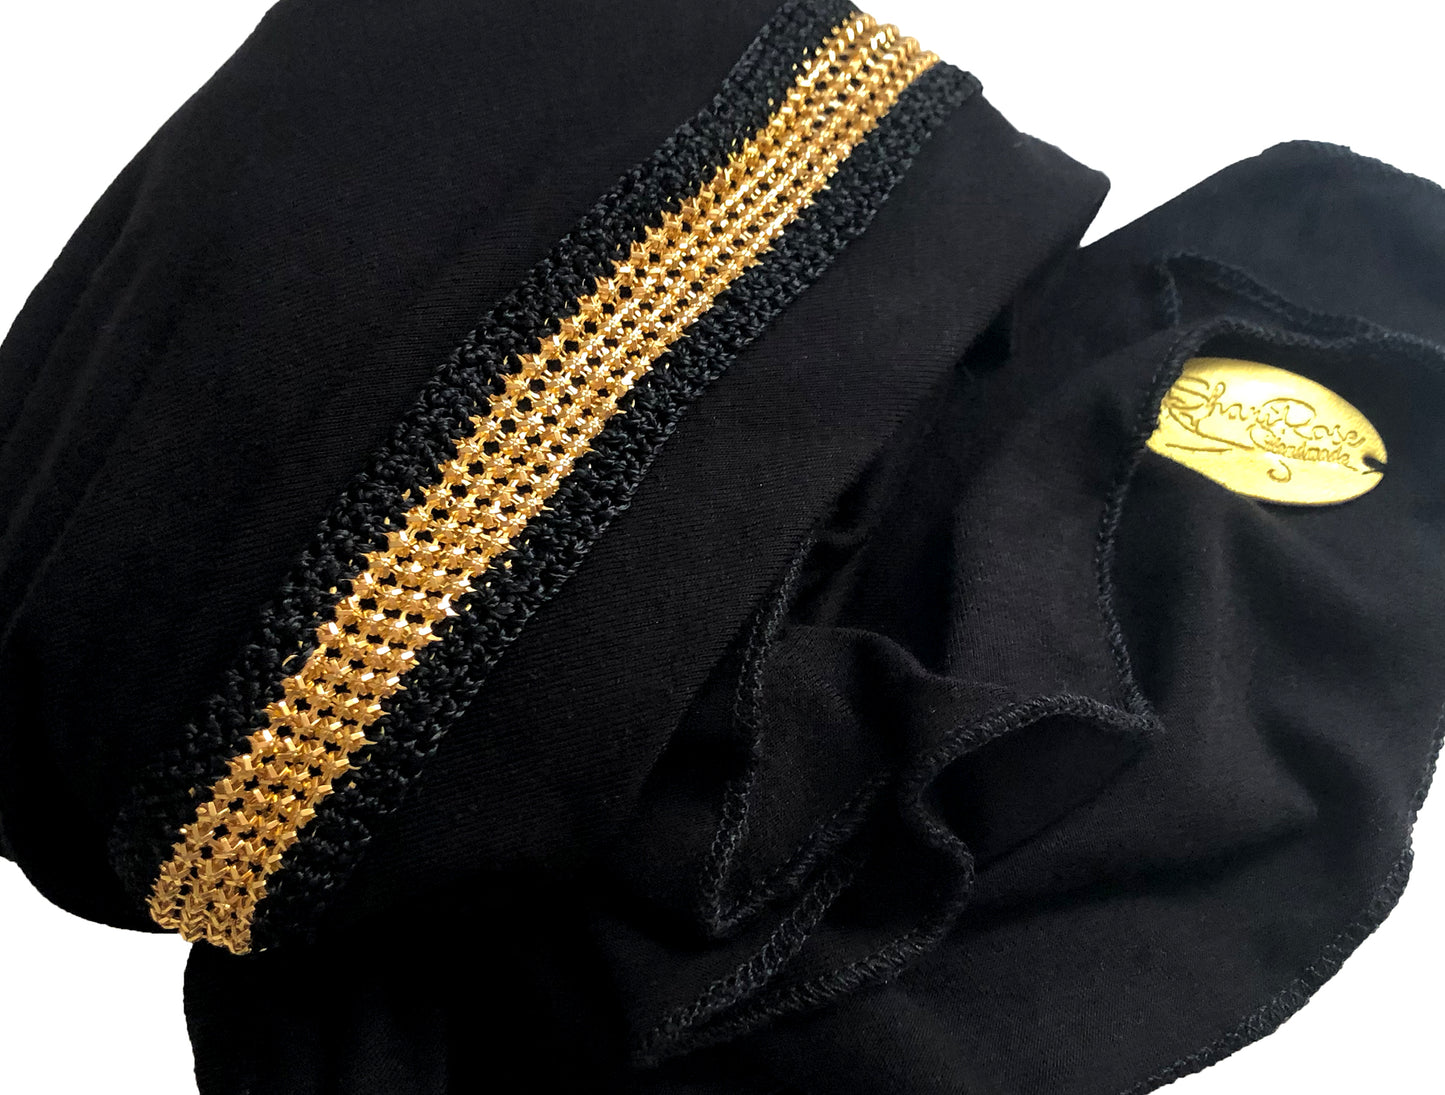 Black headscarf with gold sparkly metal trim